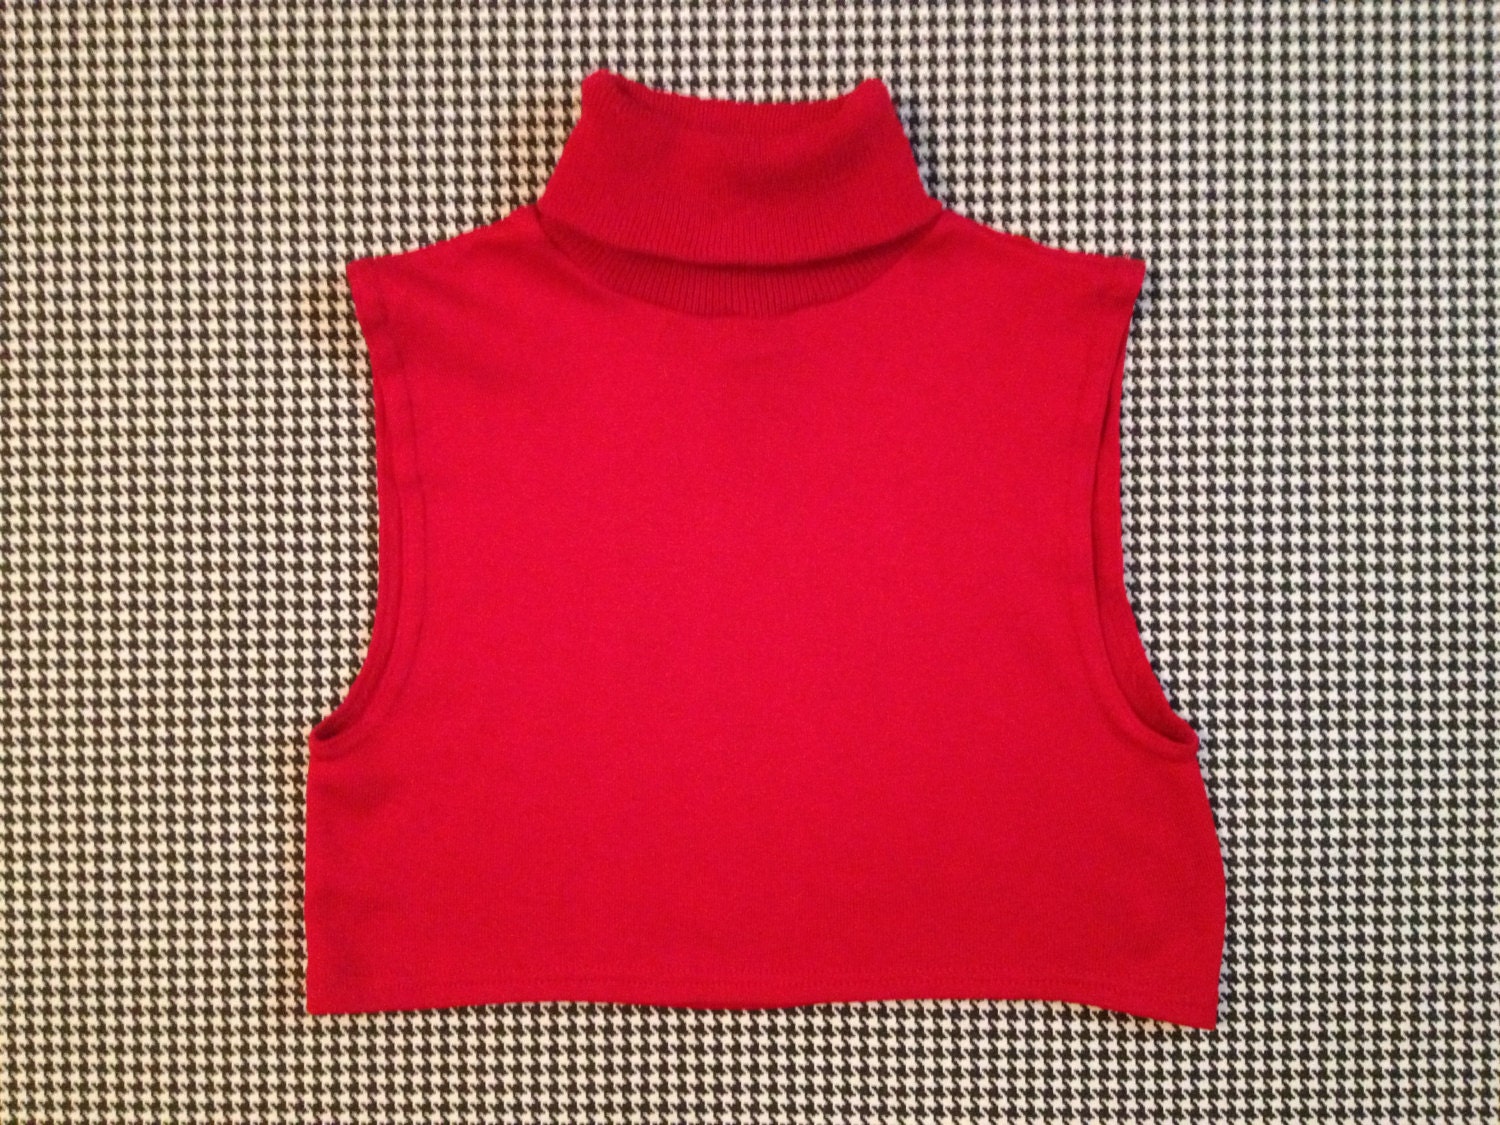 1990's red knit sleeveless turtleneck crop top